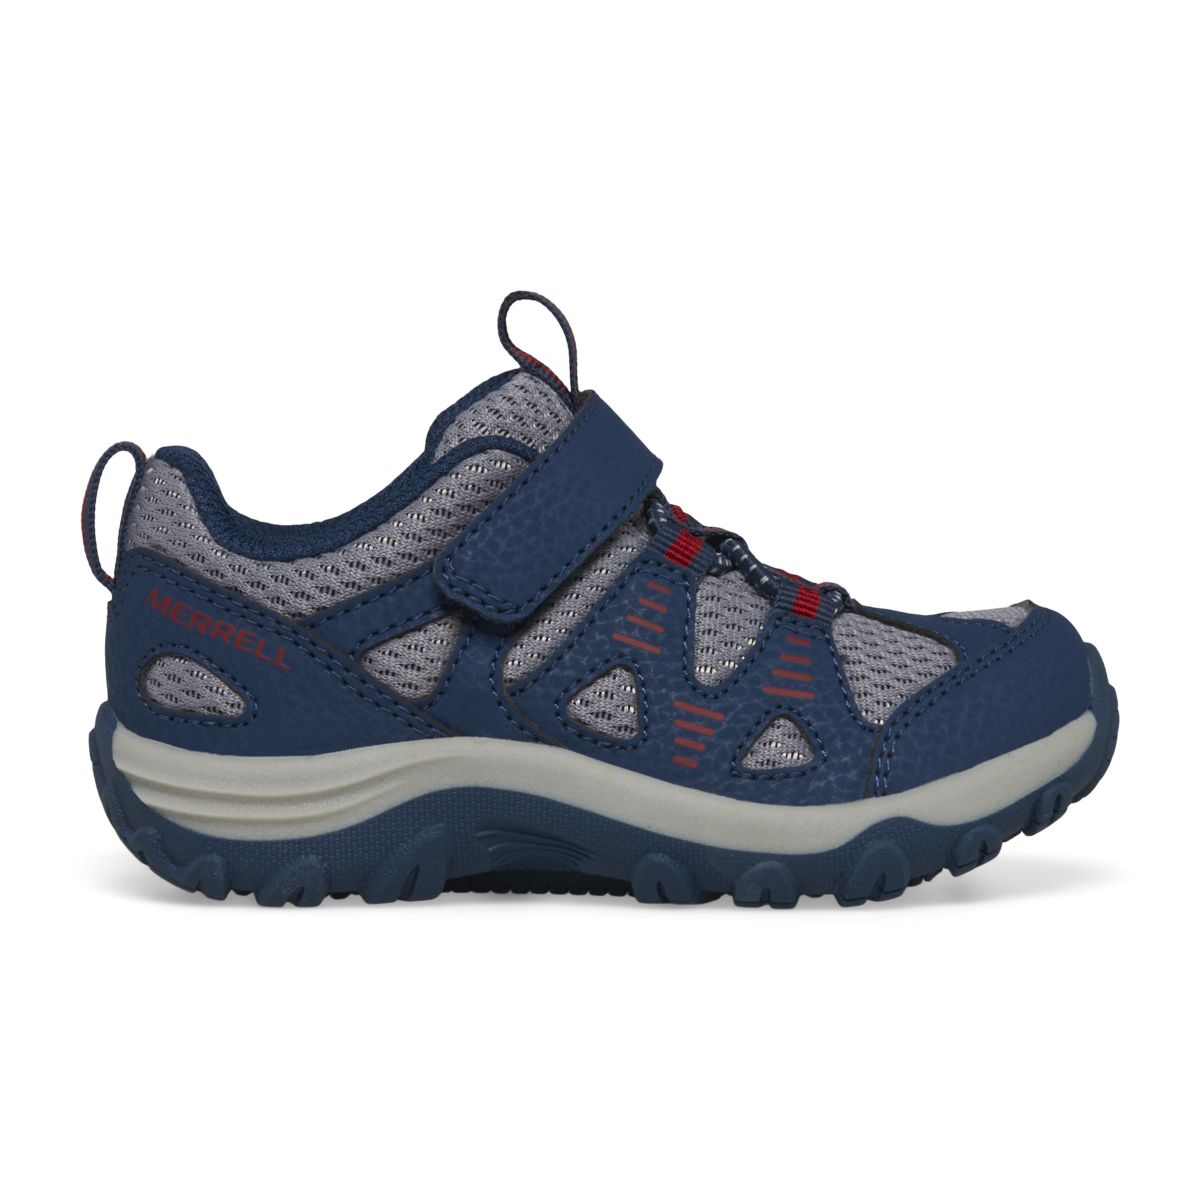 Trail Chaser 2 Jr. Shoe, Navy/Red, dynamic